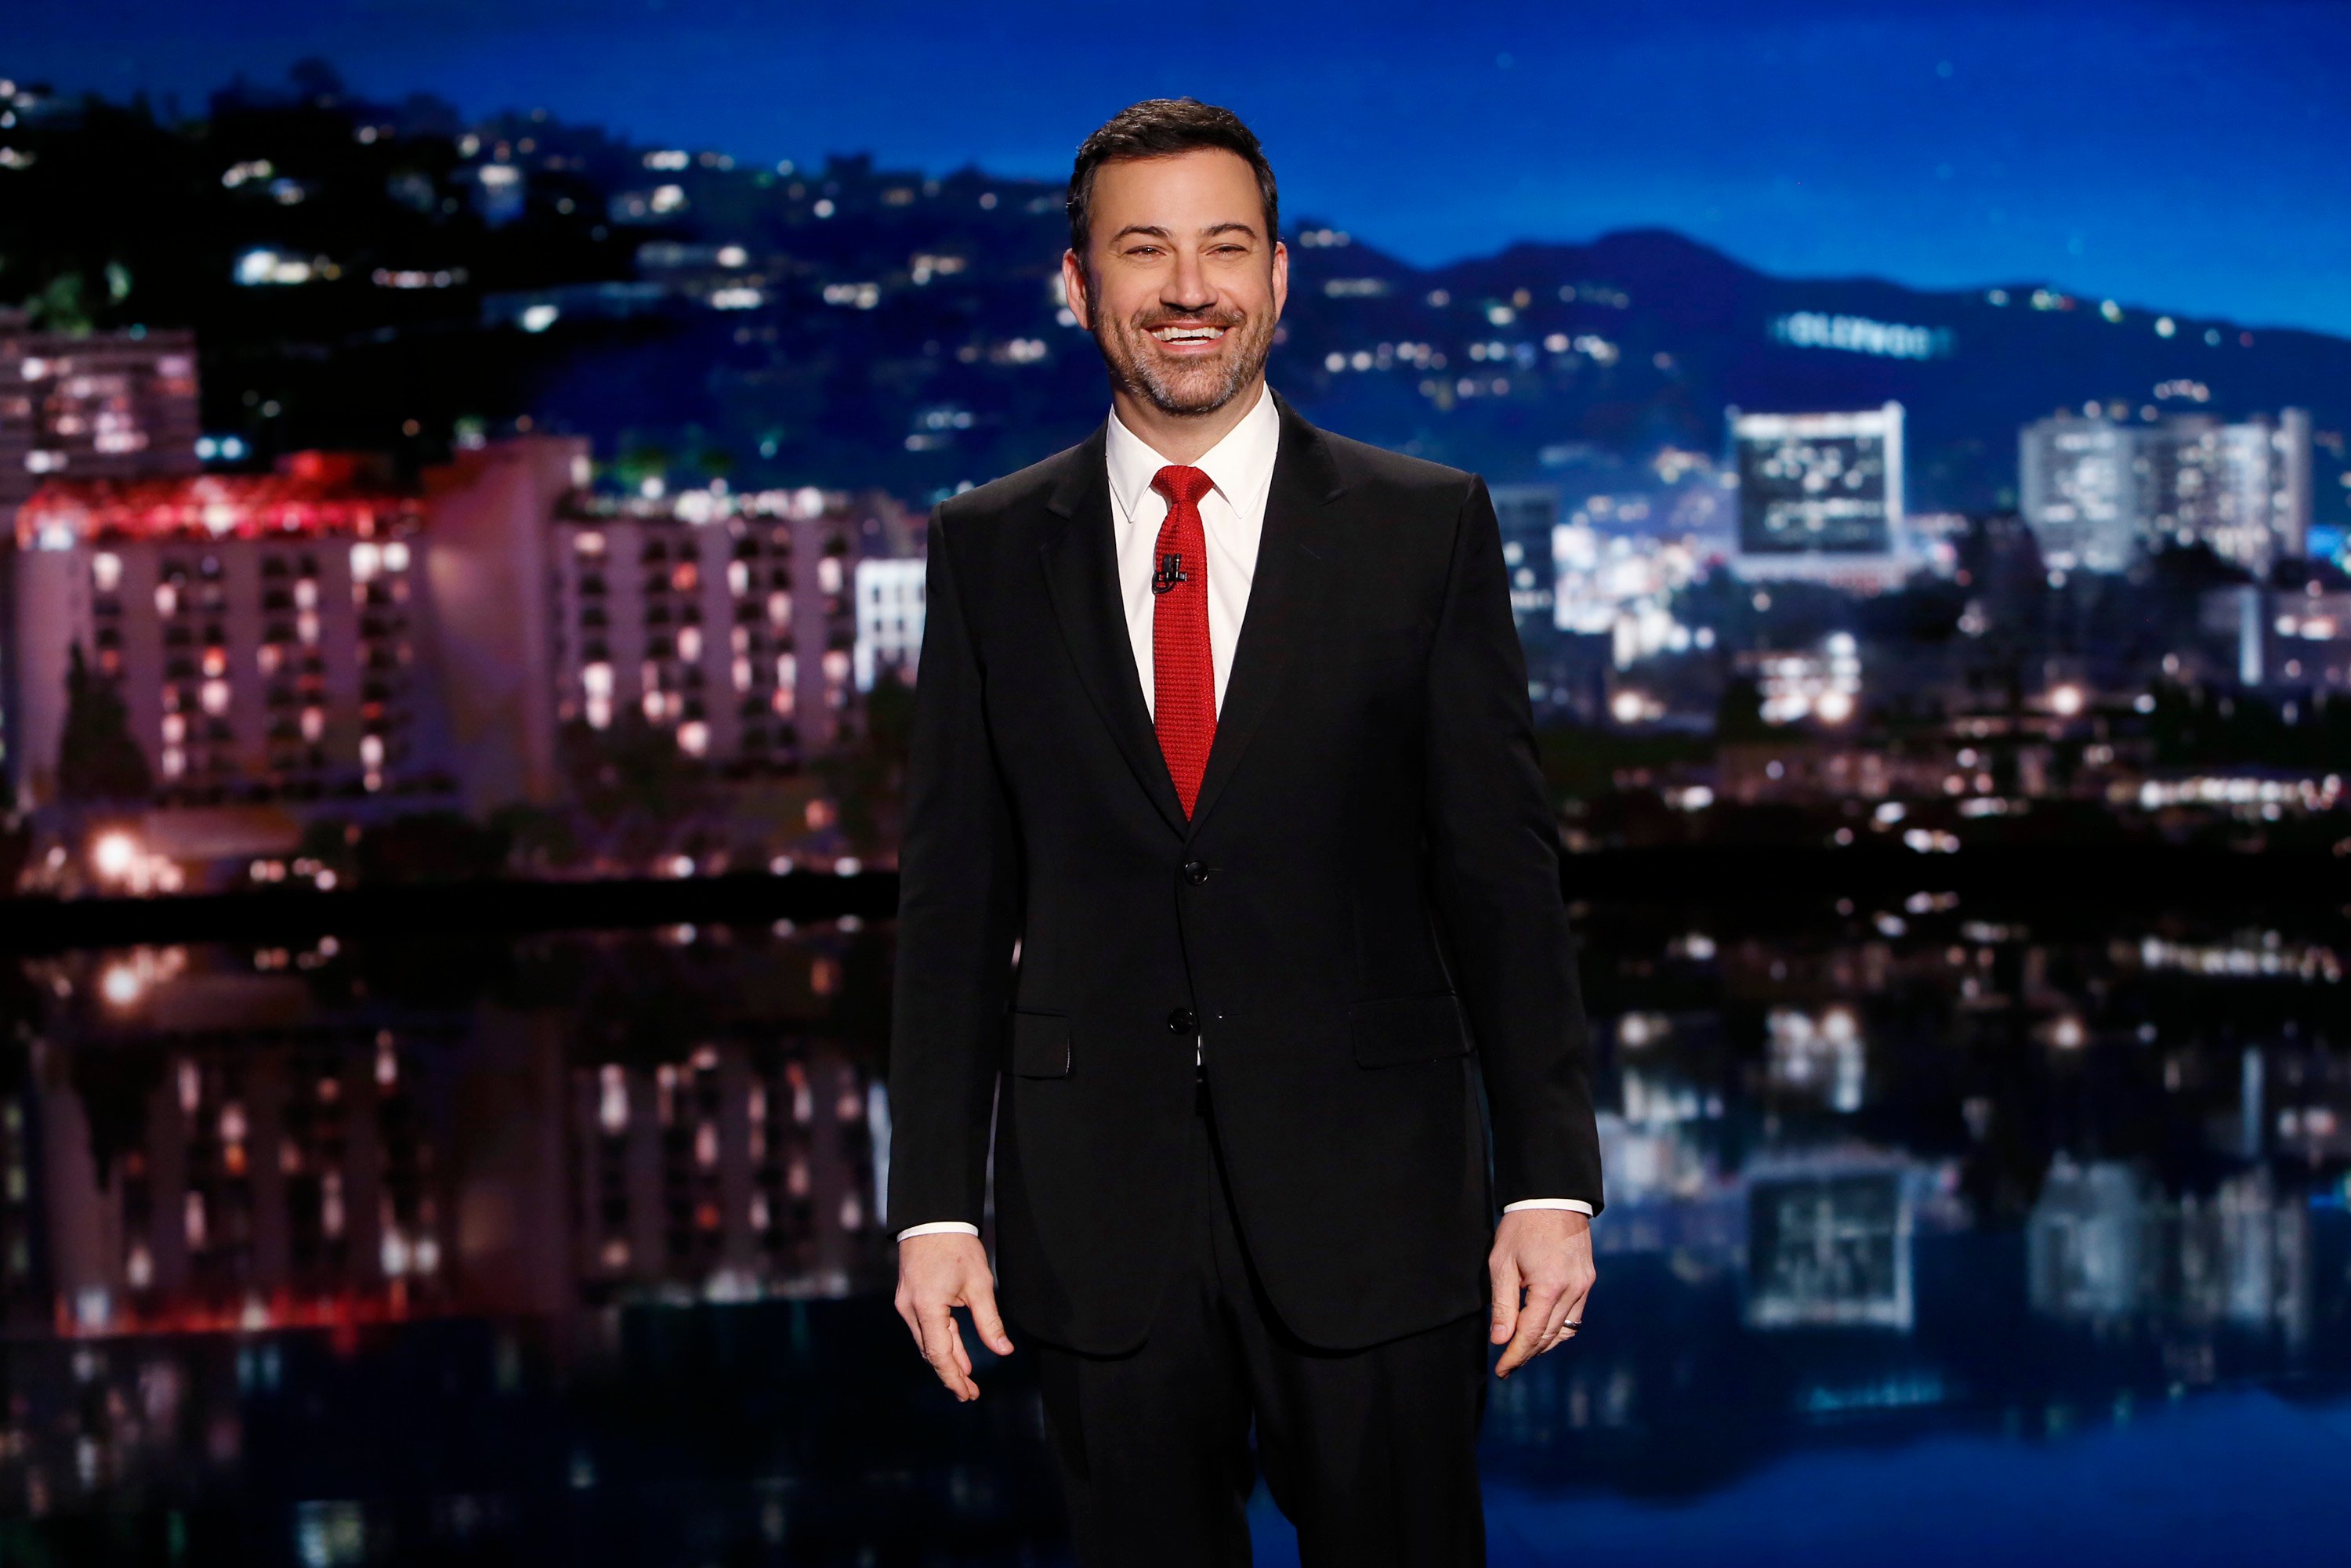 Jimmy Kimmel, who added himself into the 'Spider-Man: No Way Home' trailer, wears a black suit over a white shirt and red tie.